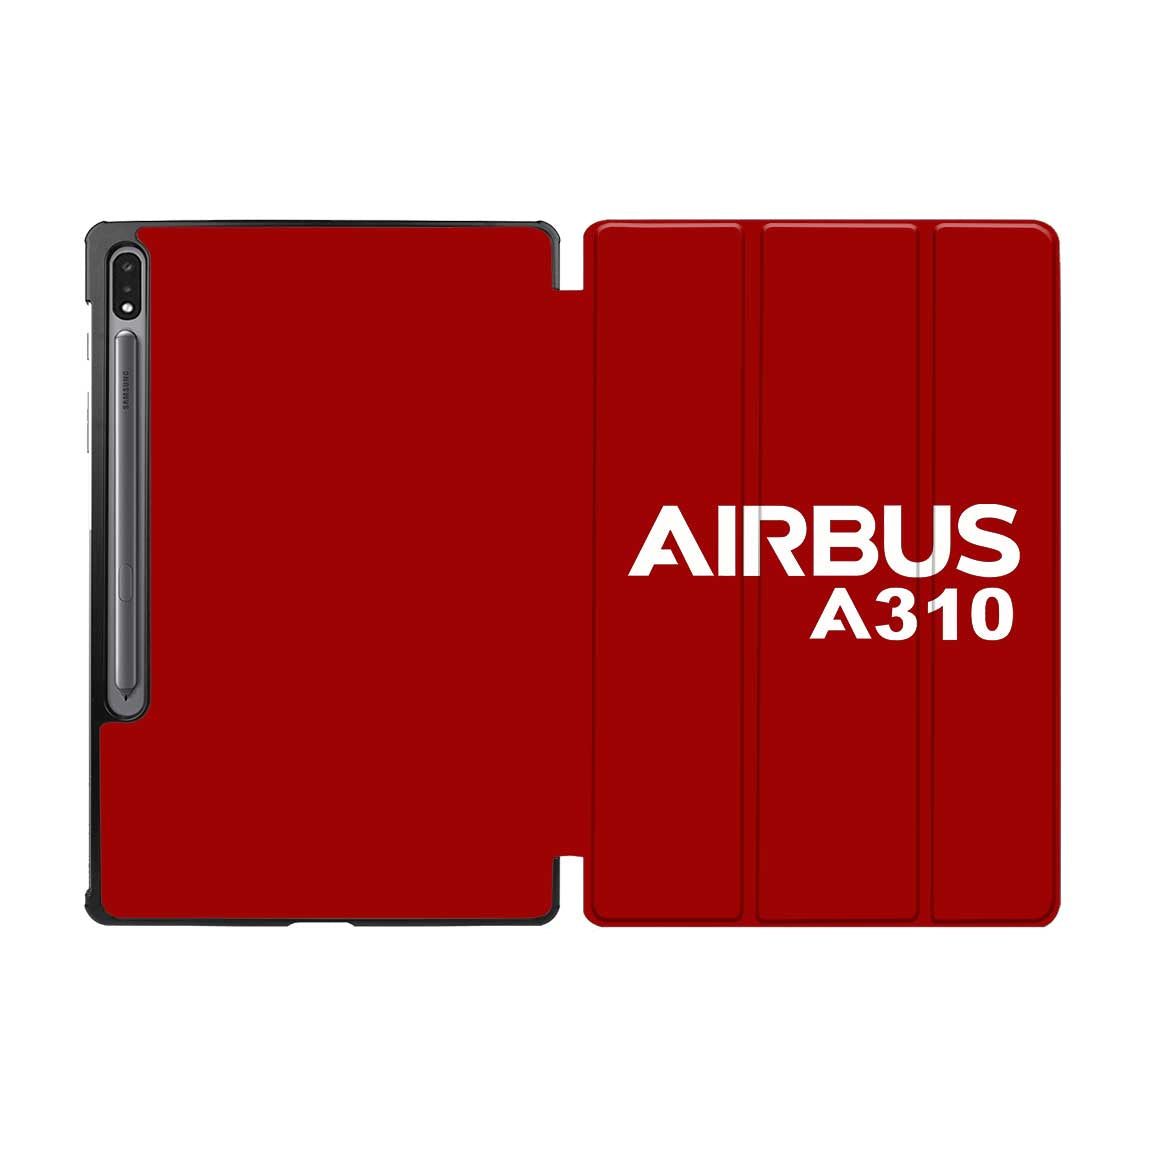 Airbus A310 & Text Designed Samsung Tablet Cases